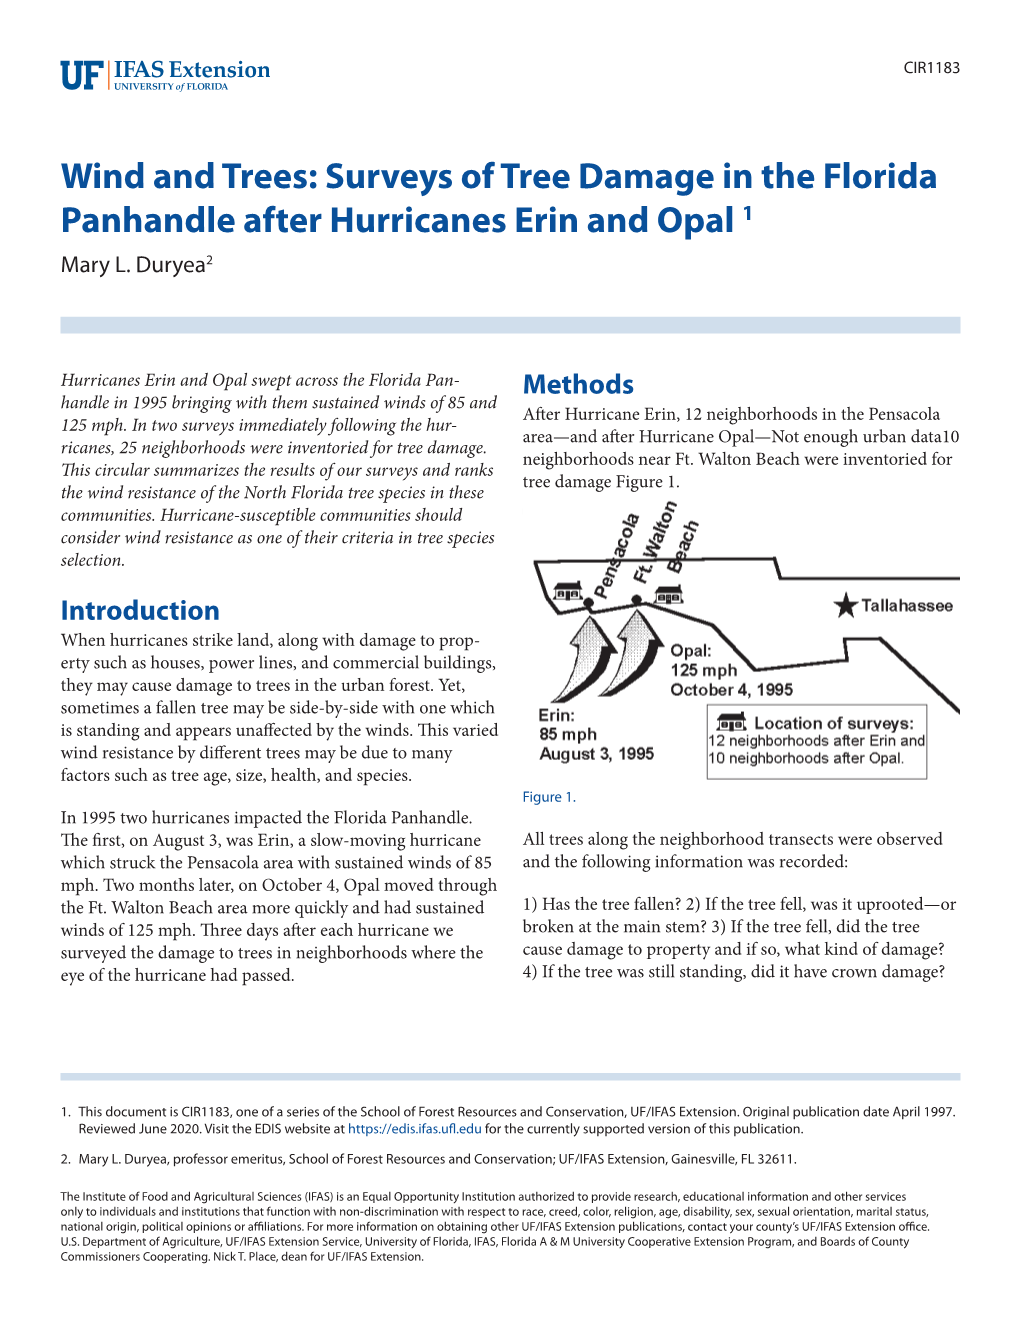 Surveys of Tree Damage in the Florida Panhandle After Hurricanes Erin and Opal 1 Mary L